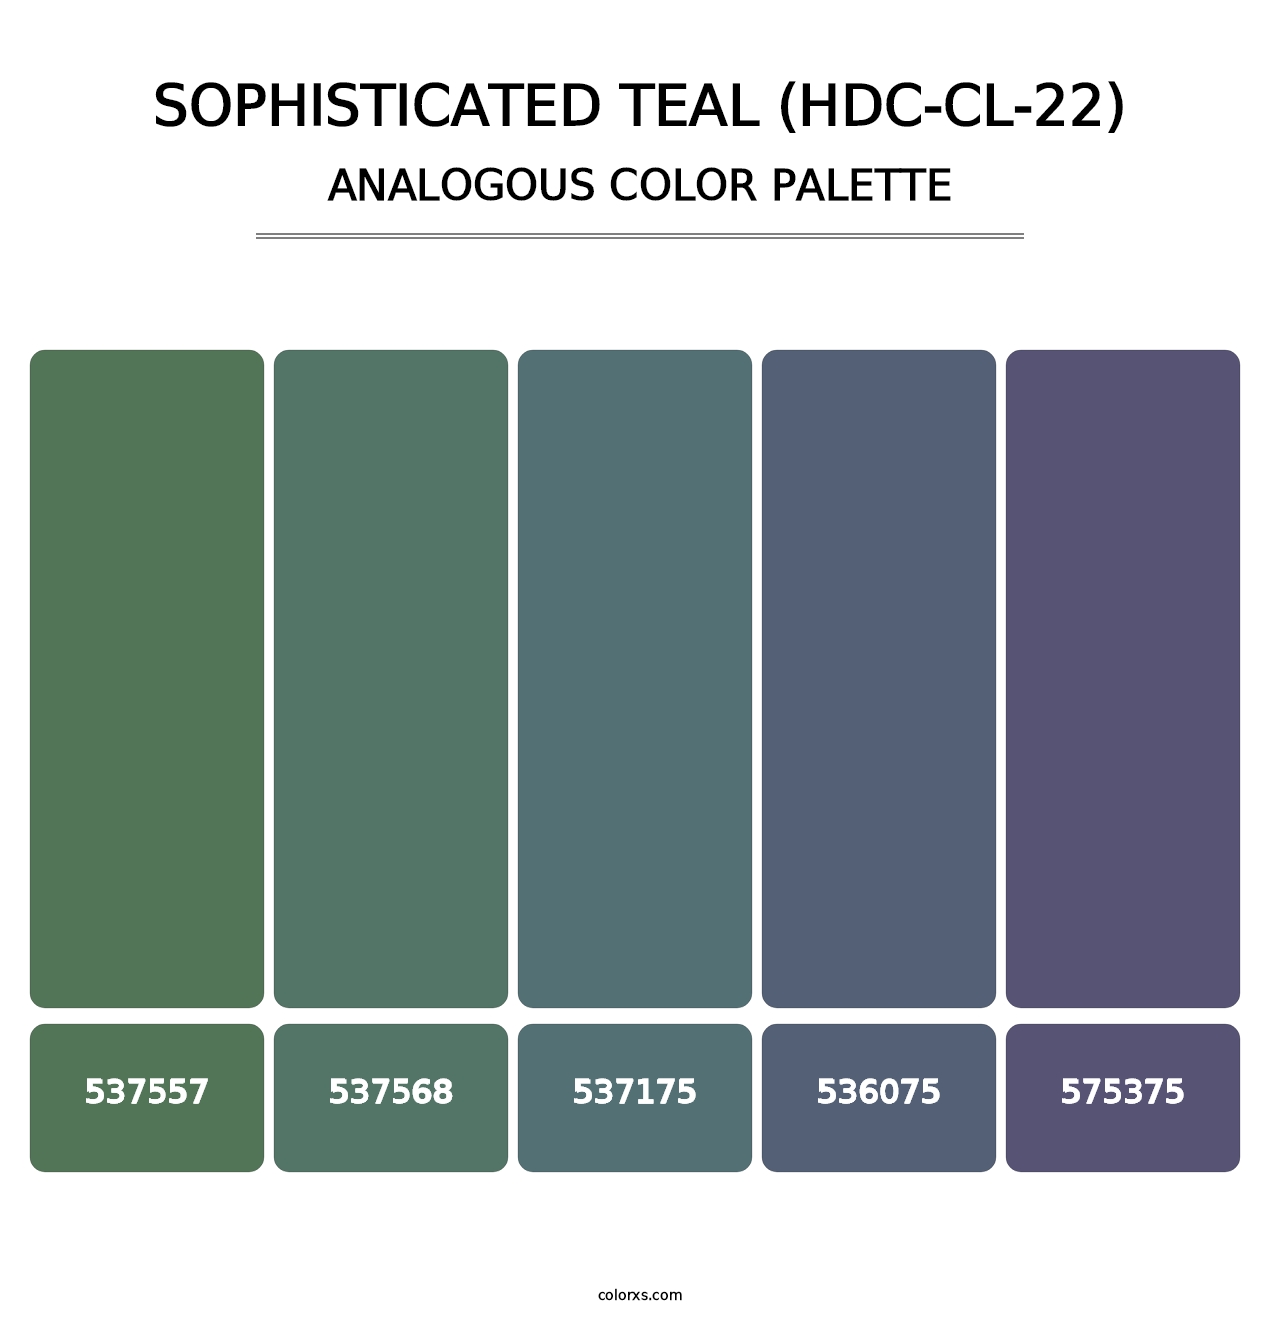 Sophisticated Teal (HDC-CL-22) - Analogous Color Palette